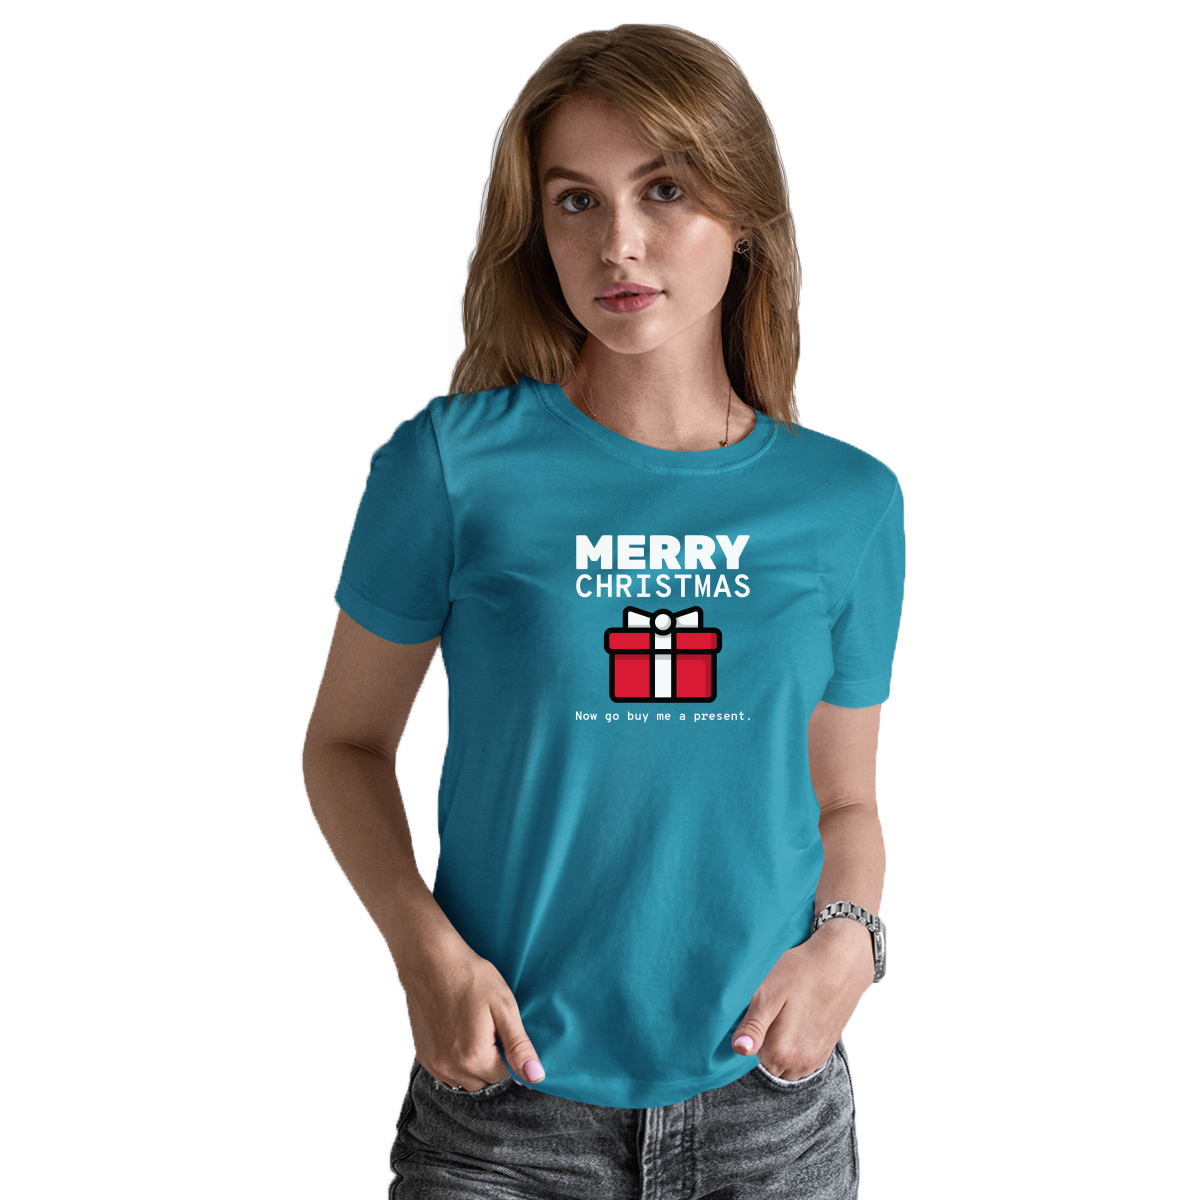 Merry Christmas Now Go Buy Me a Present Women's T-shirt | Turquoise